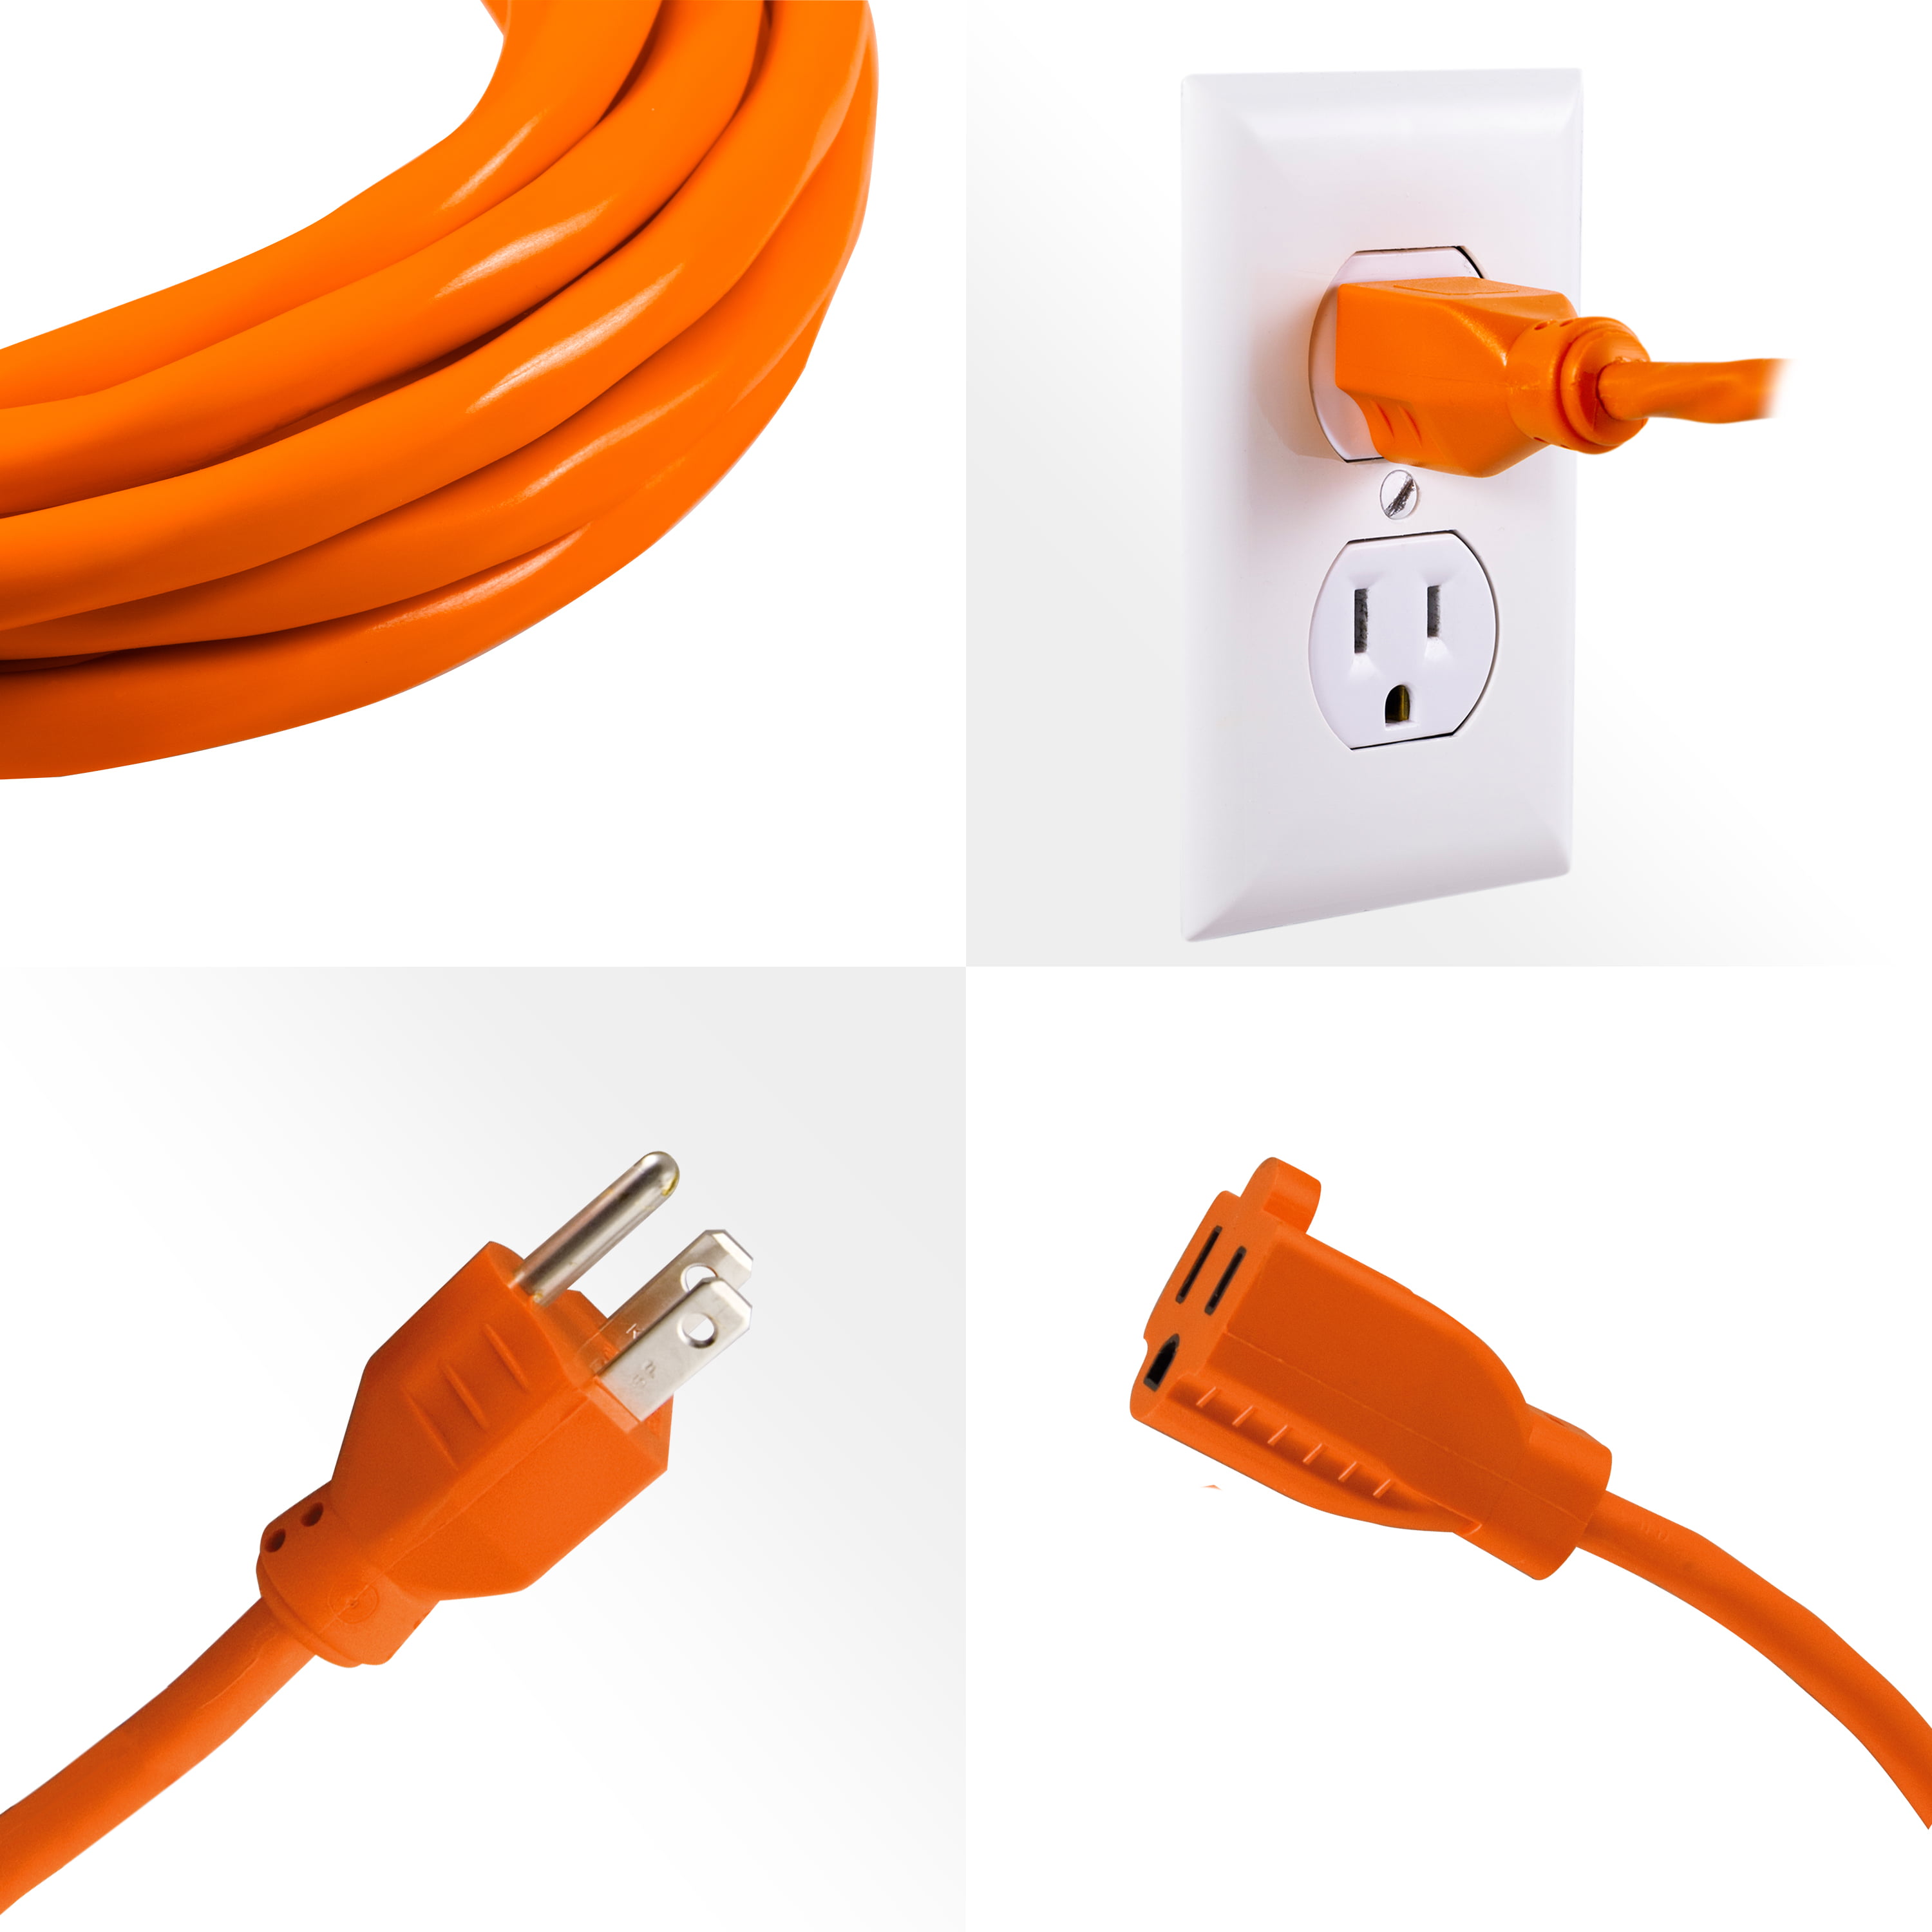 Electriduct Cord Connect Water-Tight Outdoor Lawn Garden Power Extension  Housing Cord Lock Protect Holiday Decoration Light Plugs - Orange